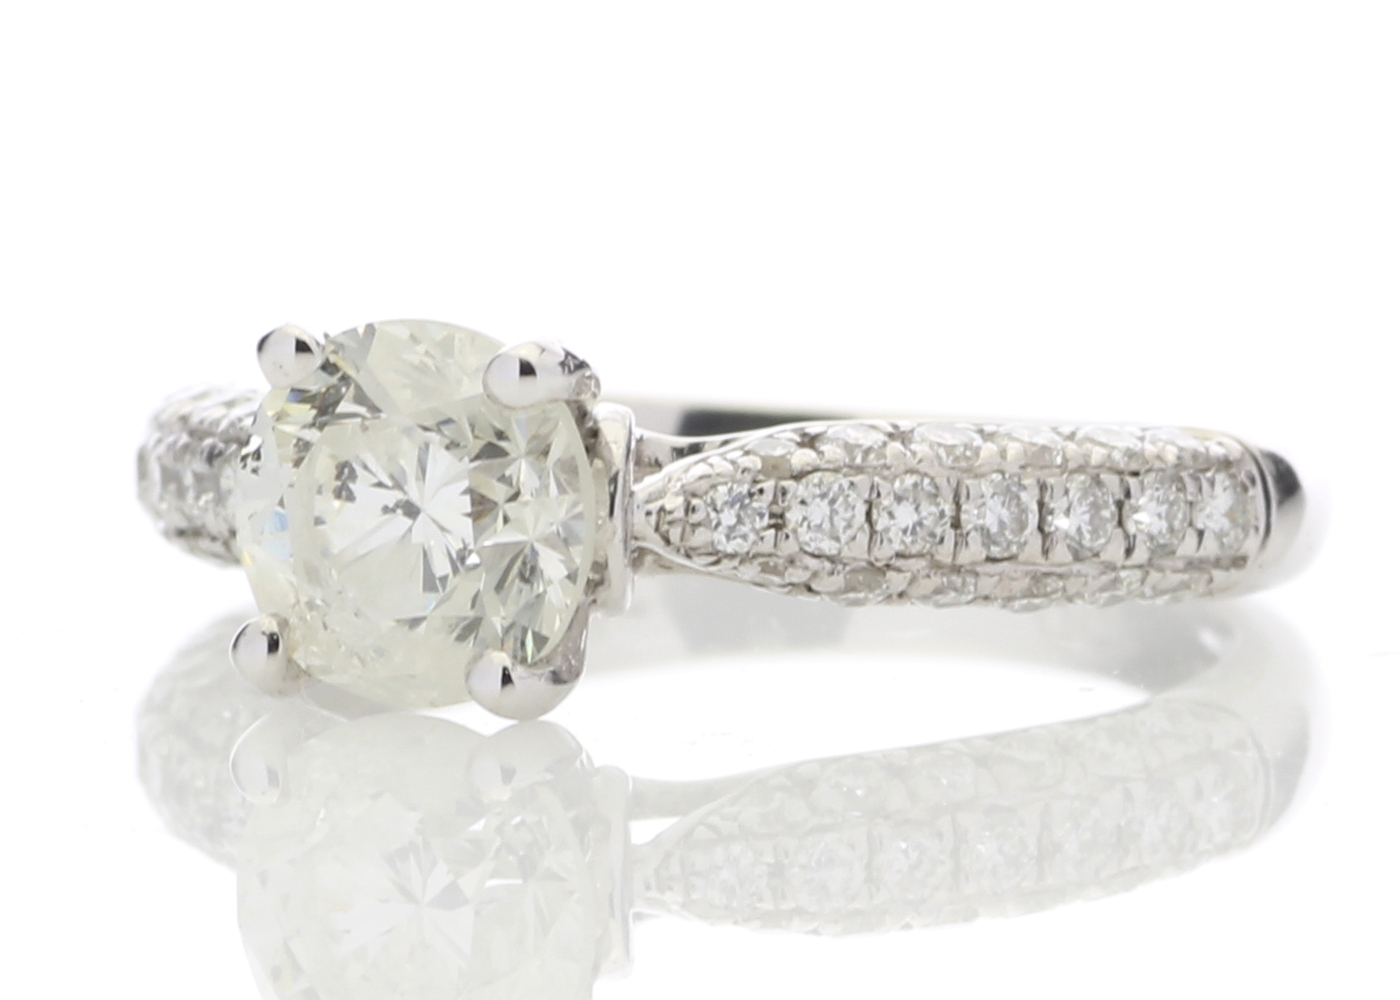 18ct White Gold Single Stone Diamond Ring With Stone Set Shoulders (1.00) 1.38 Carats - Image 2 of 5